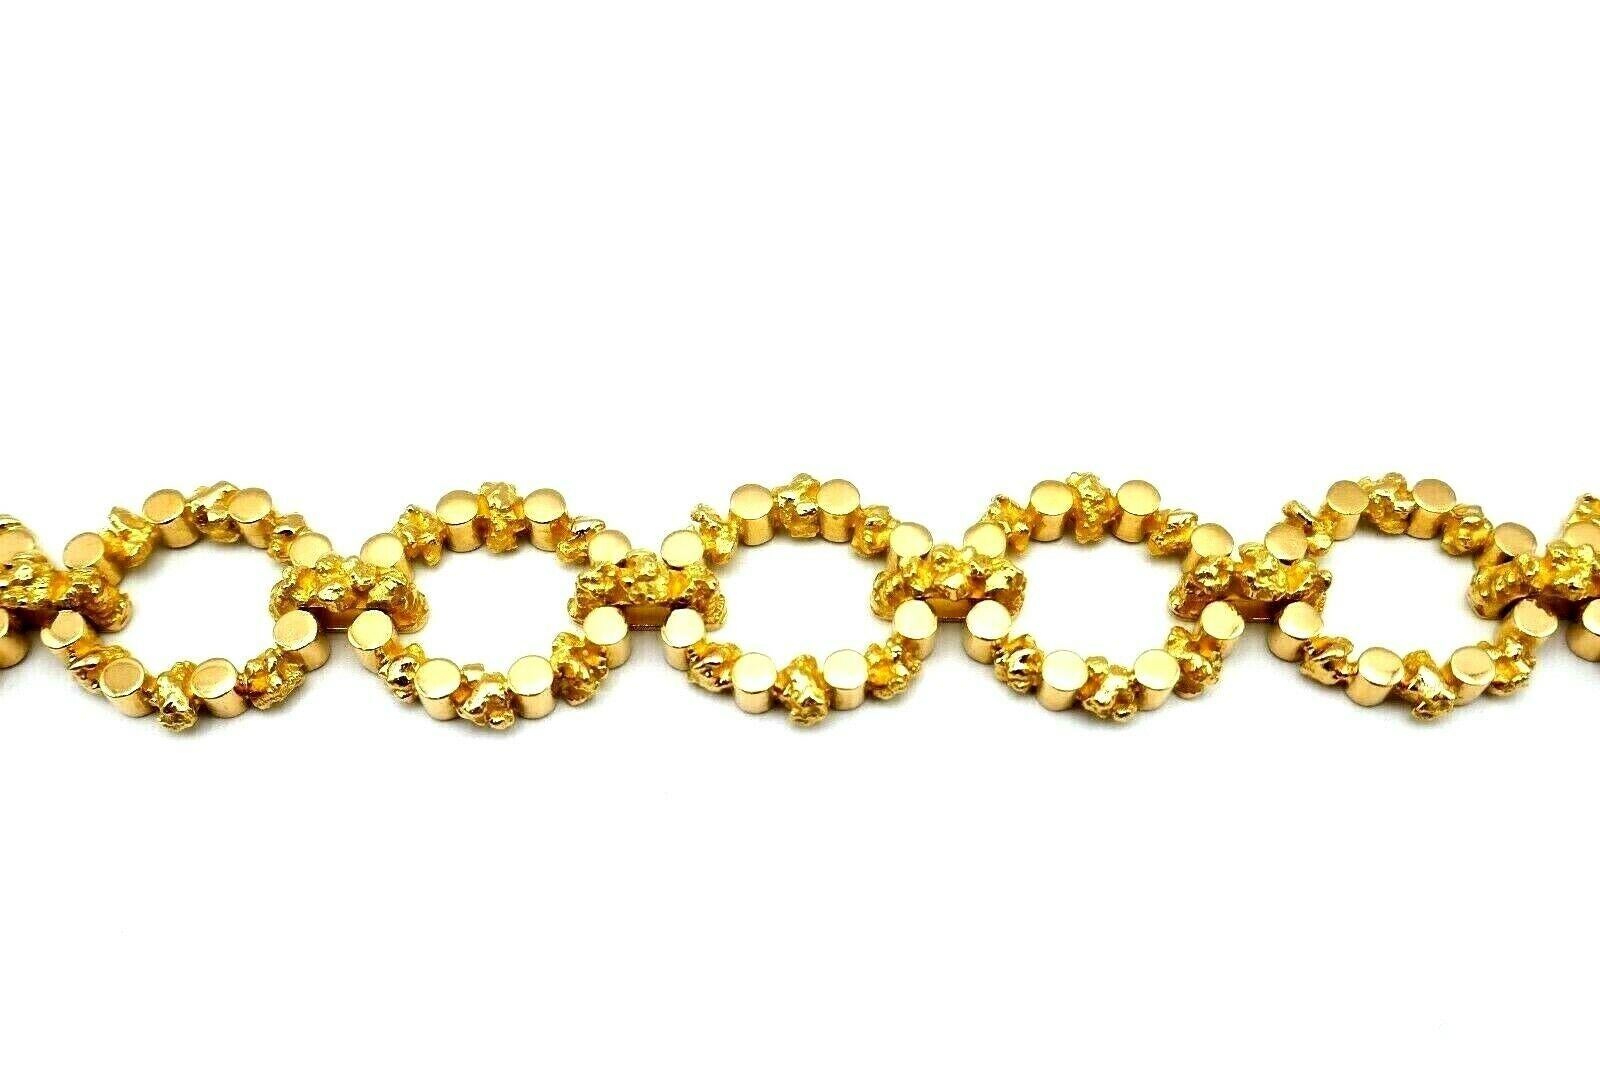 A unique vintage French bracelet. Made of 18k yellow gold. Has a great combo of hammered and polished gold. Stamped with a French marks and a hallmark for 18k gold. 
Measurements: 7 3/4